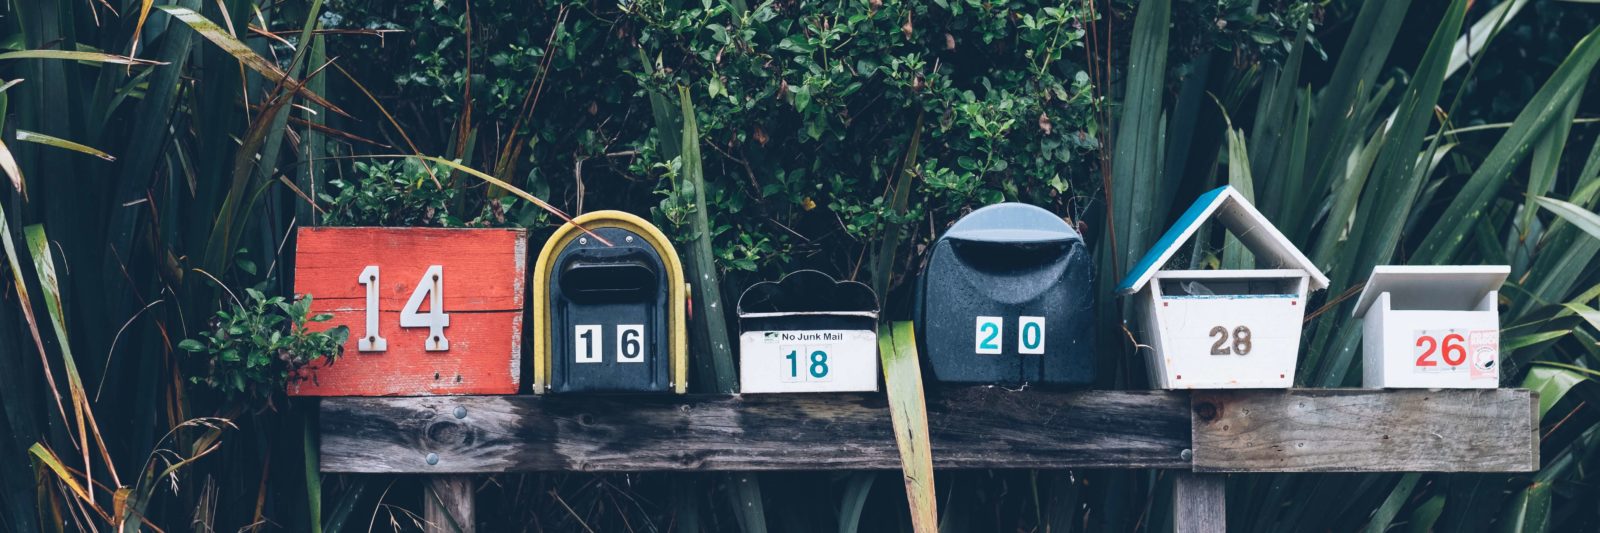 variety of mailboxes on wooden rail with house numbers